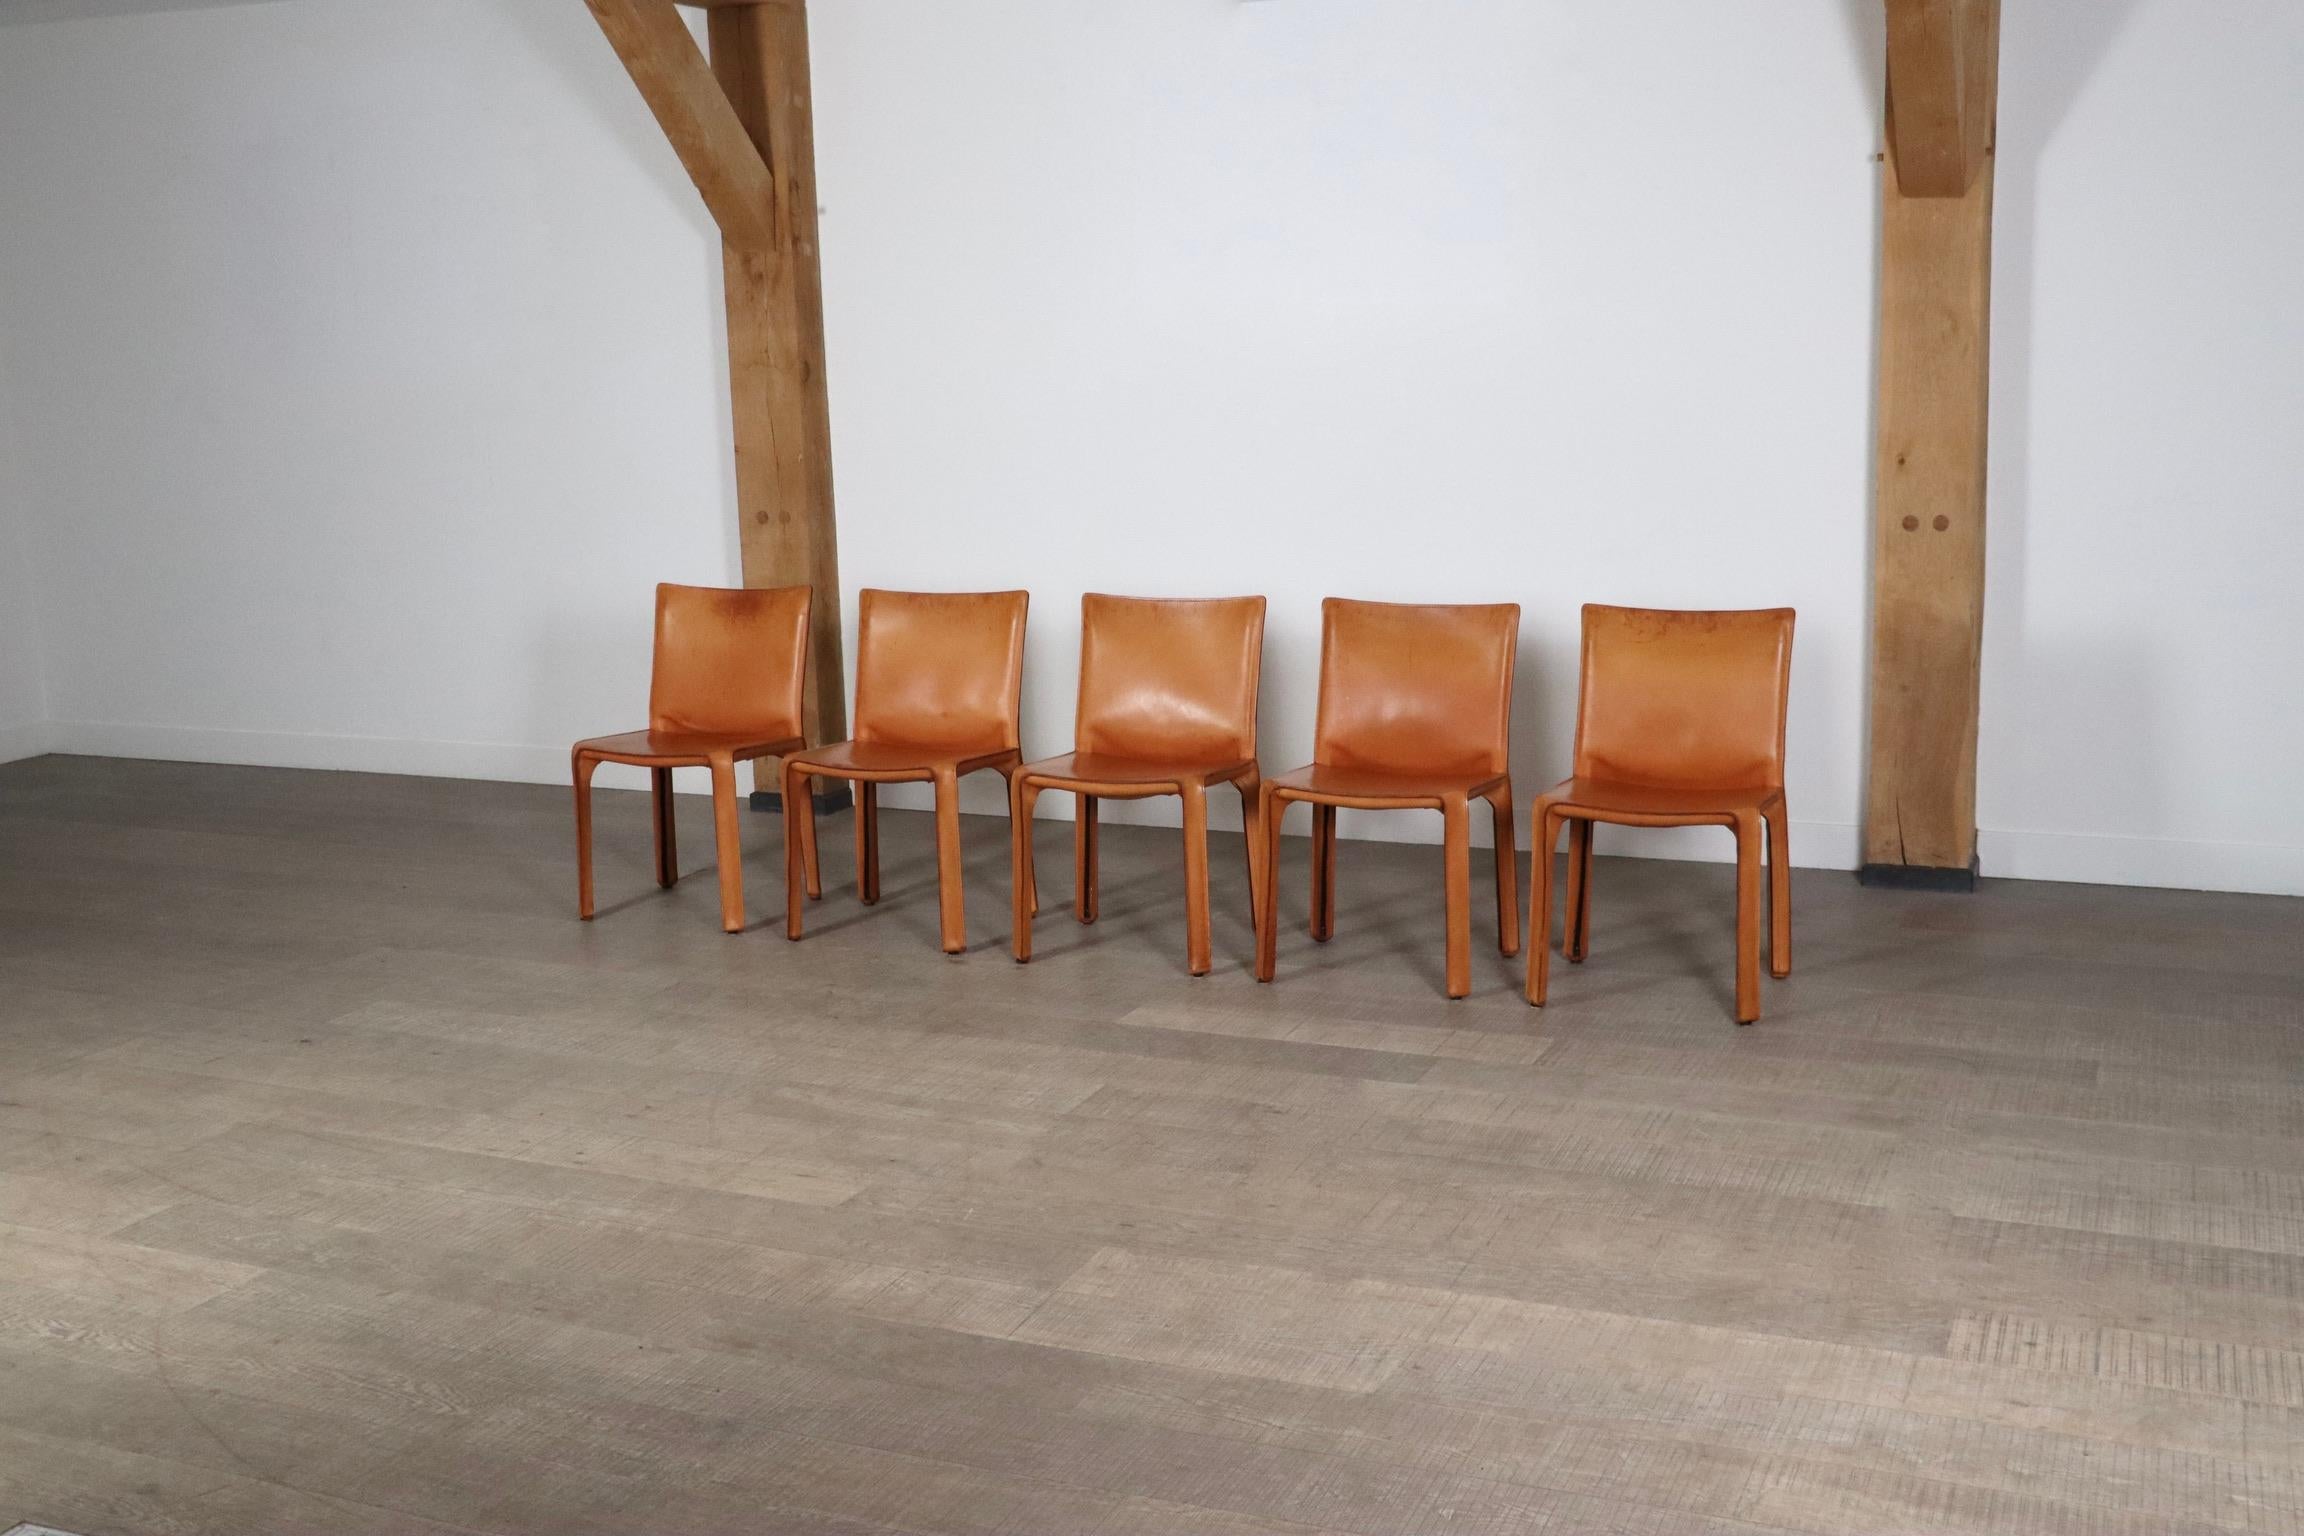 Incredible set of 5 CAB 412 chairs in stunning original cognac leather by great designer Mario Bellini for Cassina, 1980s.

CAB was the first-ever chair to feature a free-standing leather structure, inspired by how our skin fits over our skeleton.